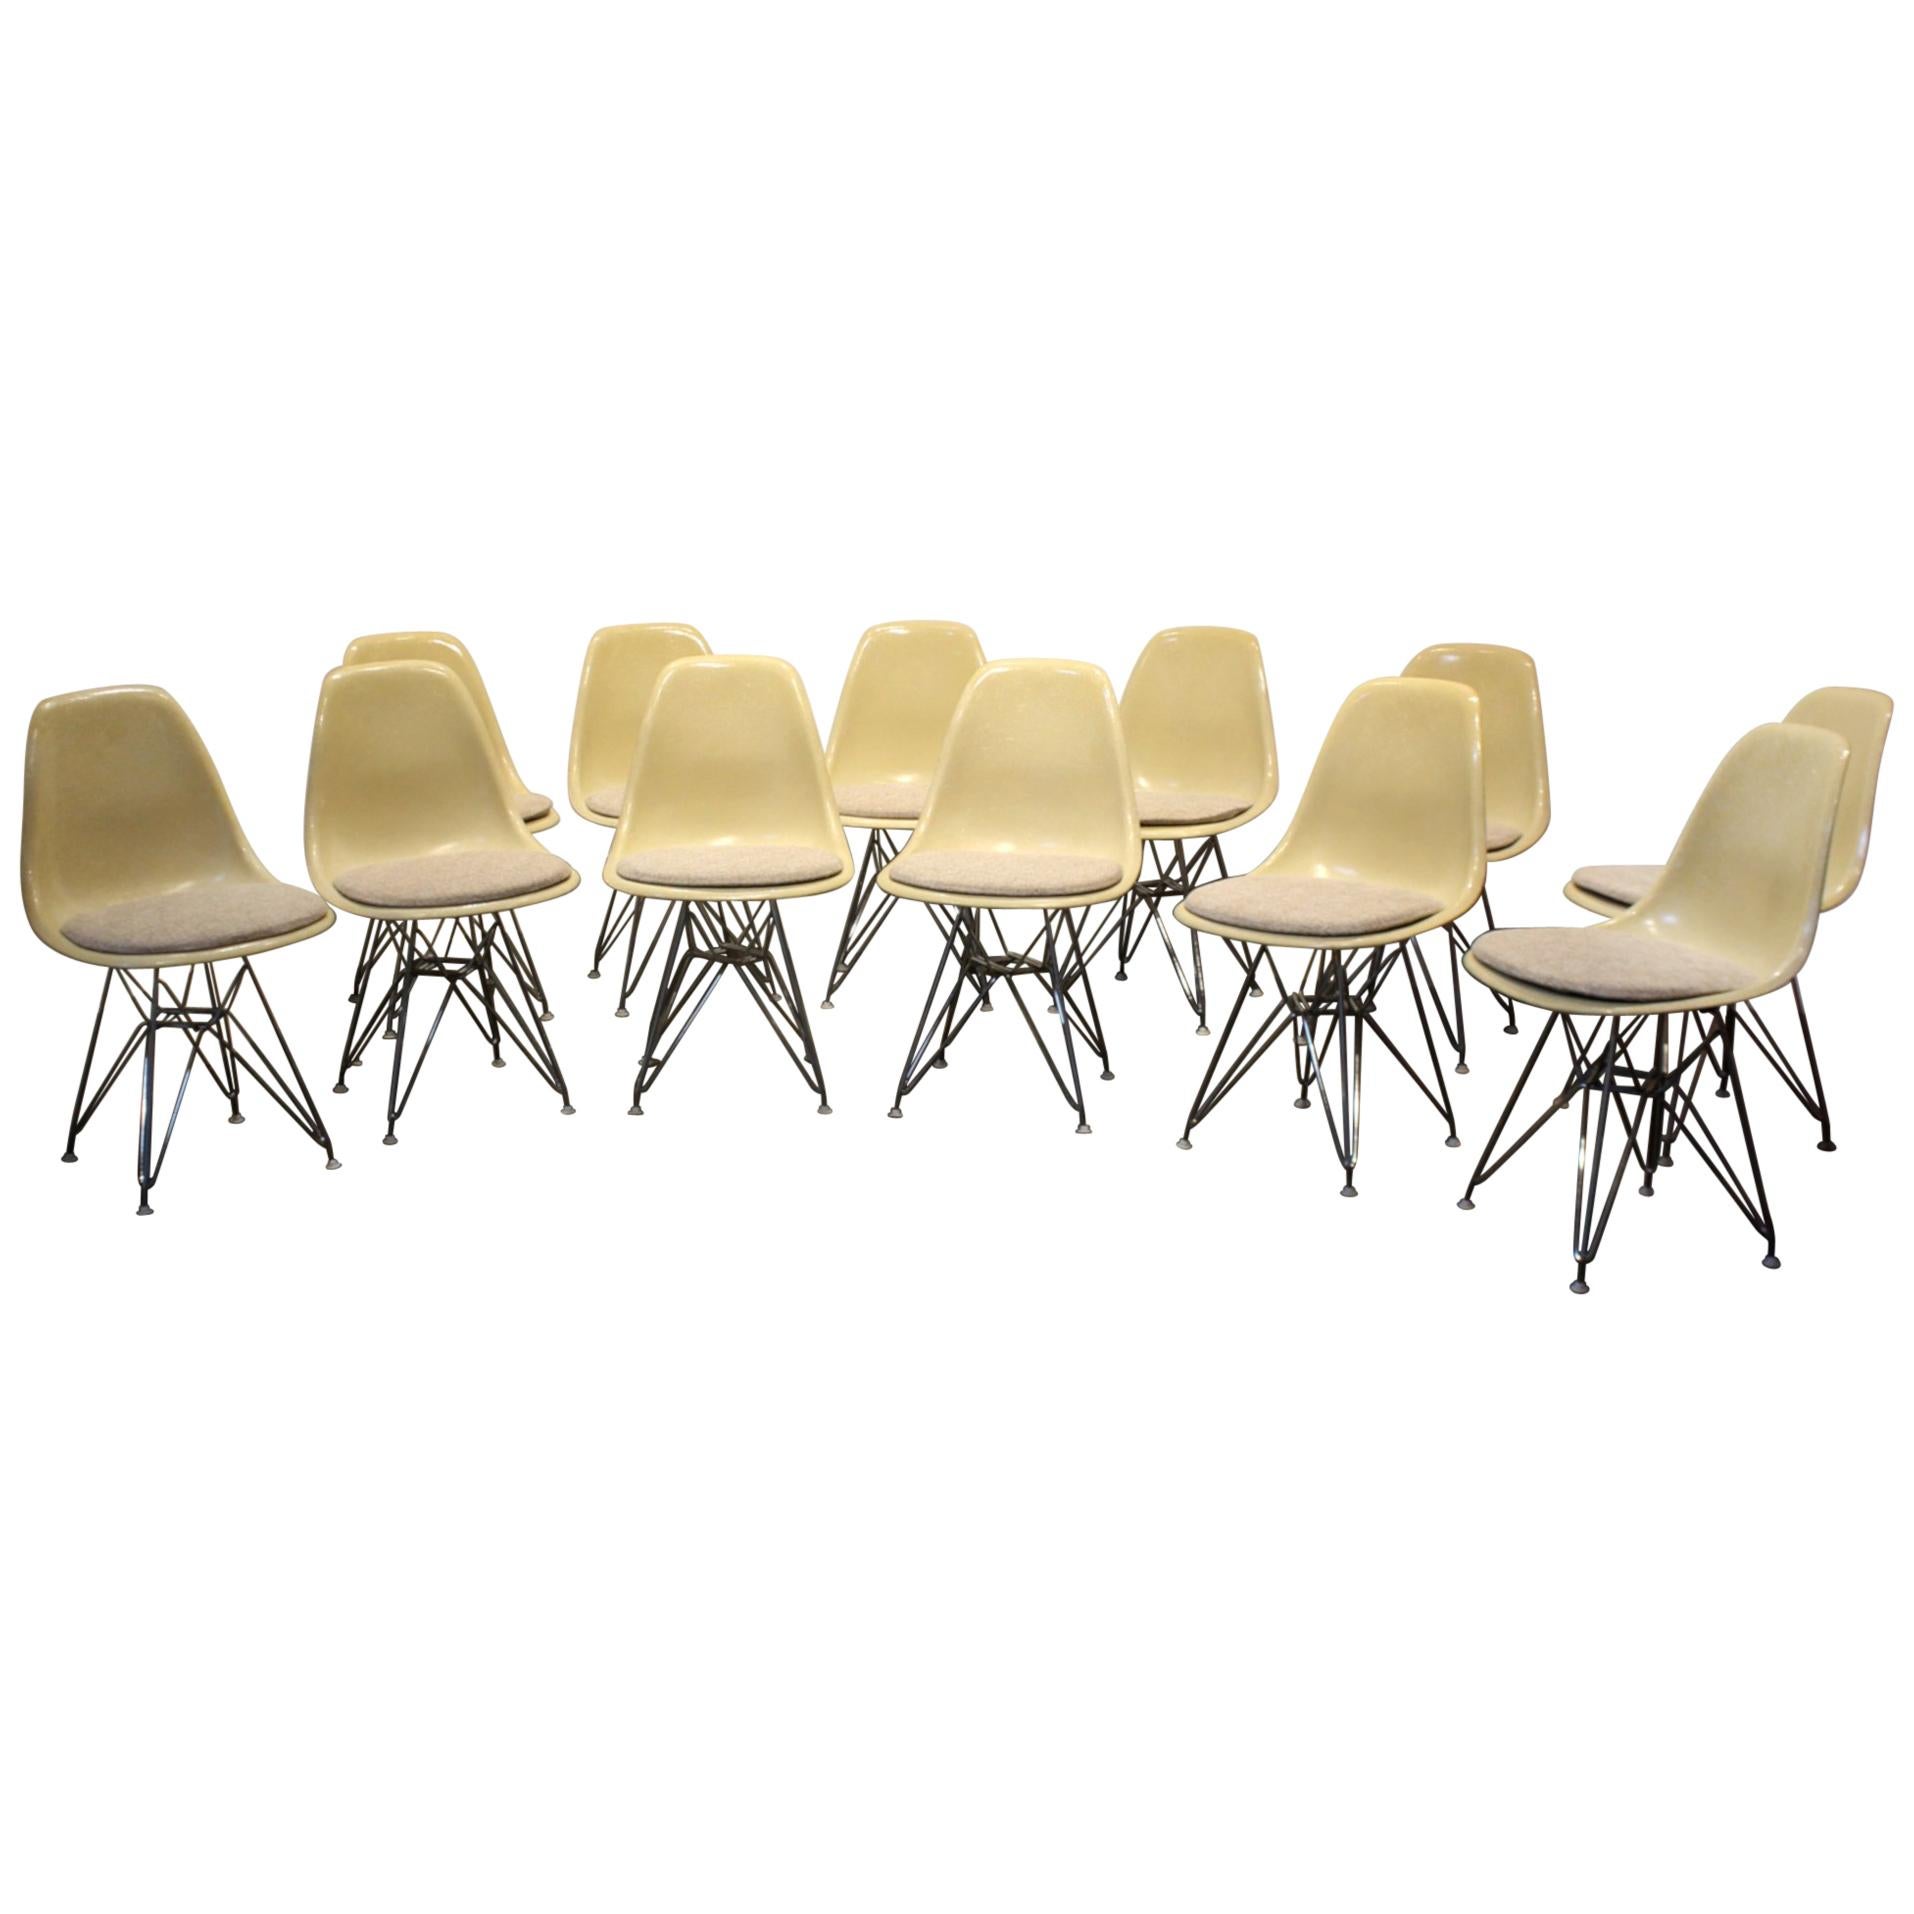 Set of 6 Eames for Herman Miller Fiberglass Side Chairs Eiffel Tower Base For Sale